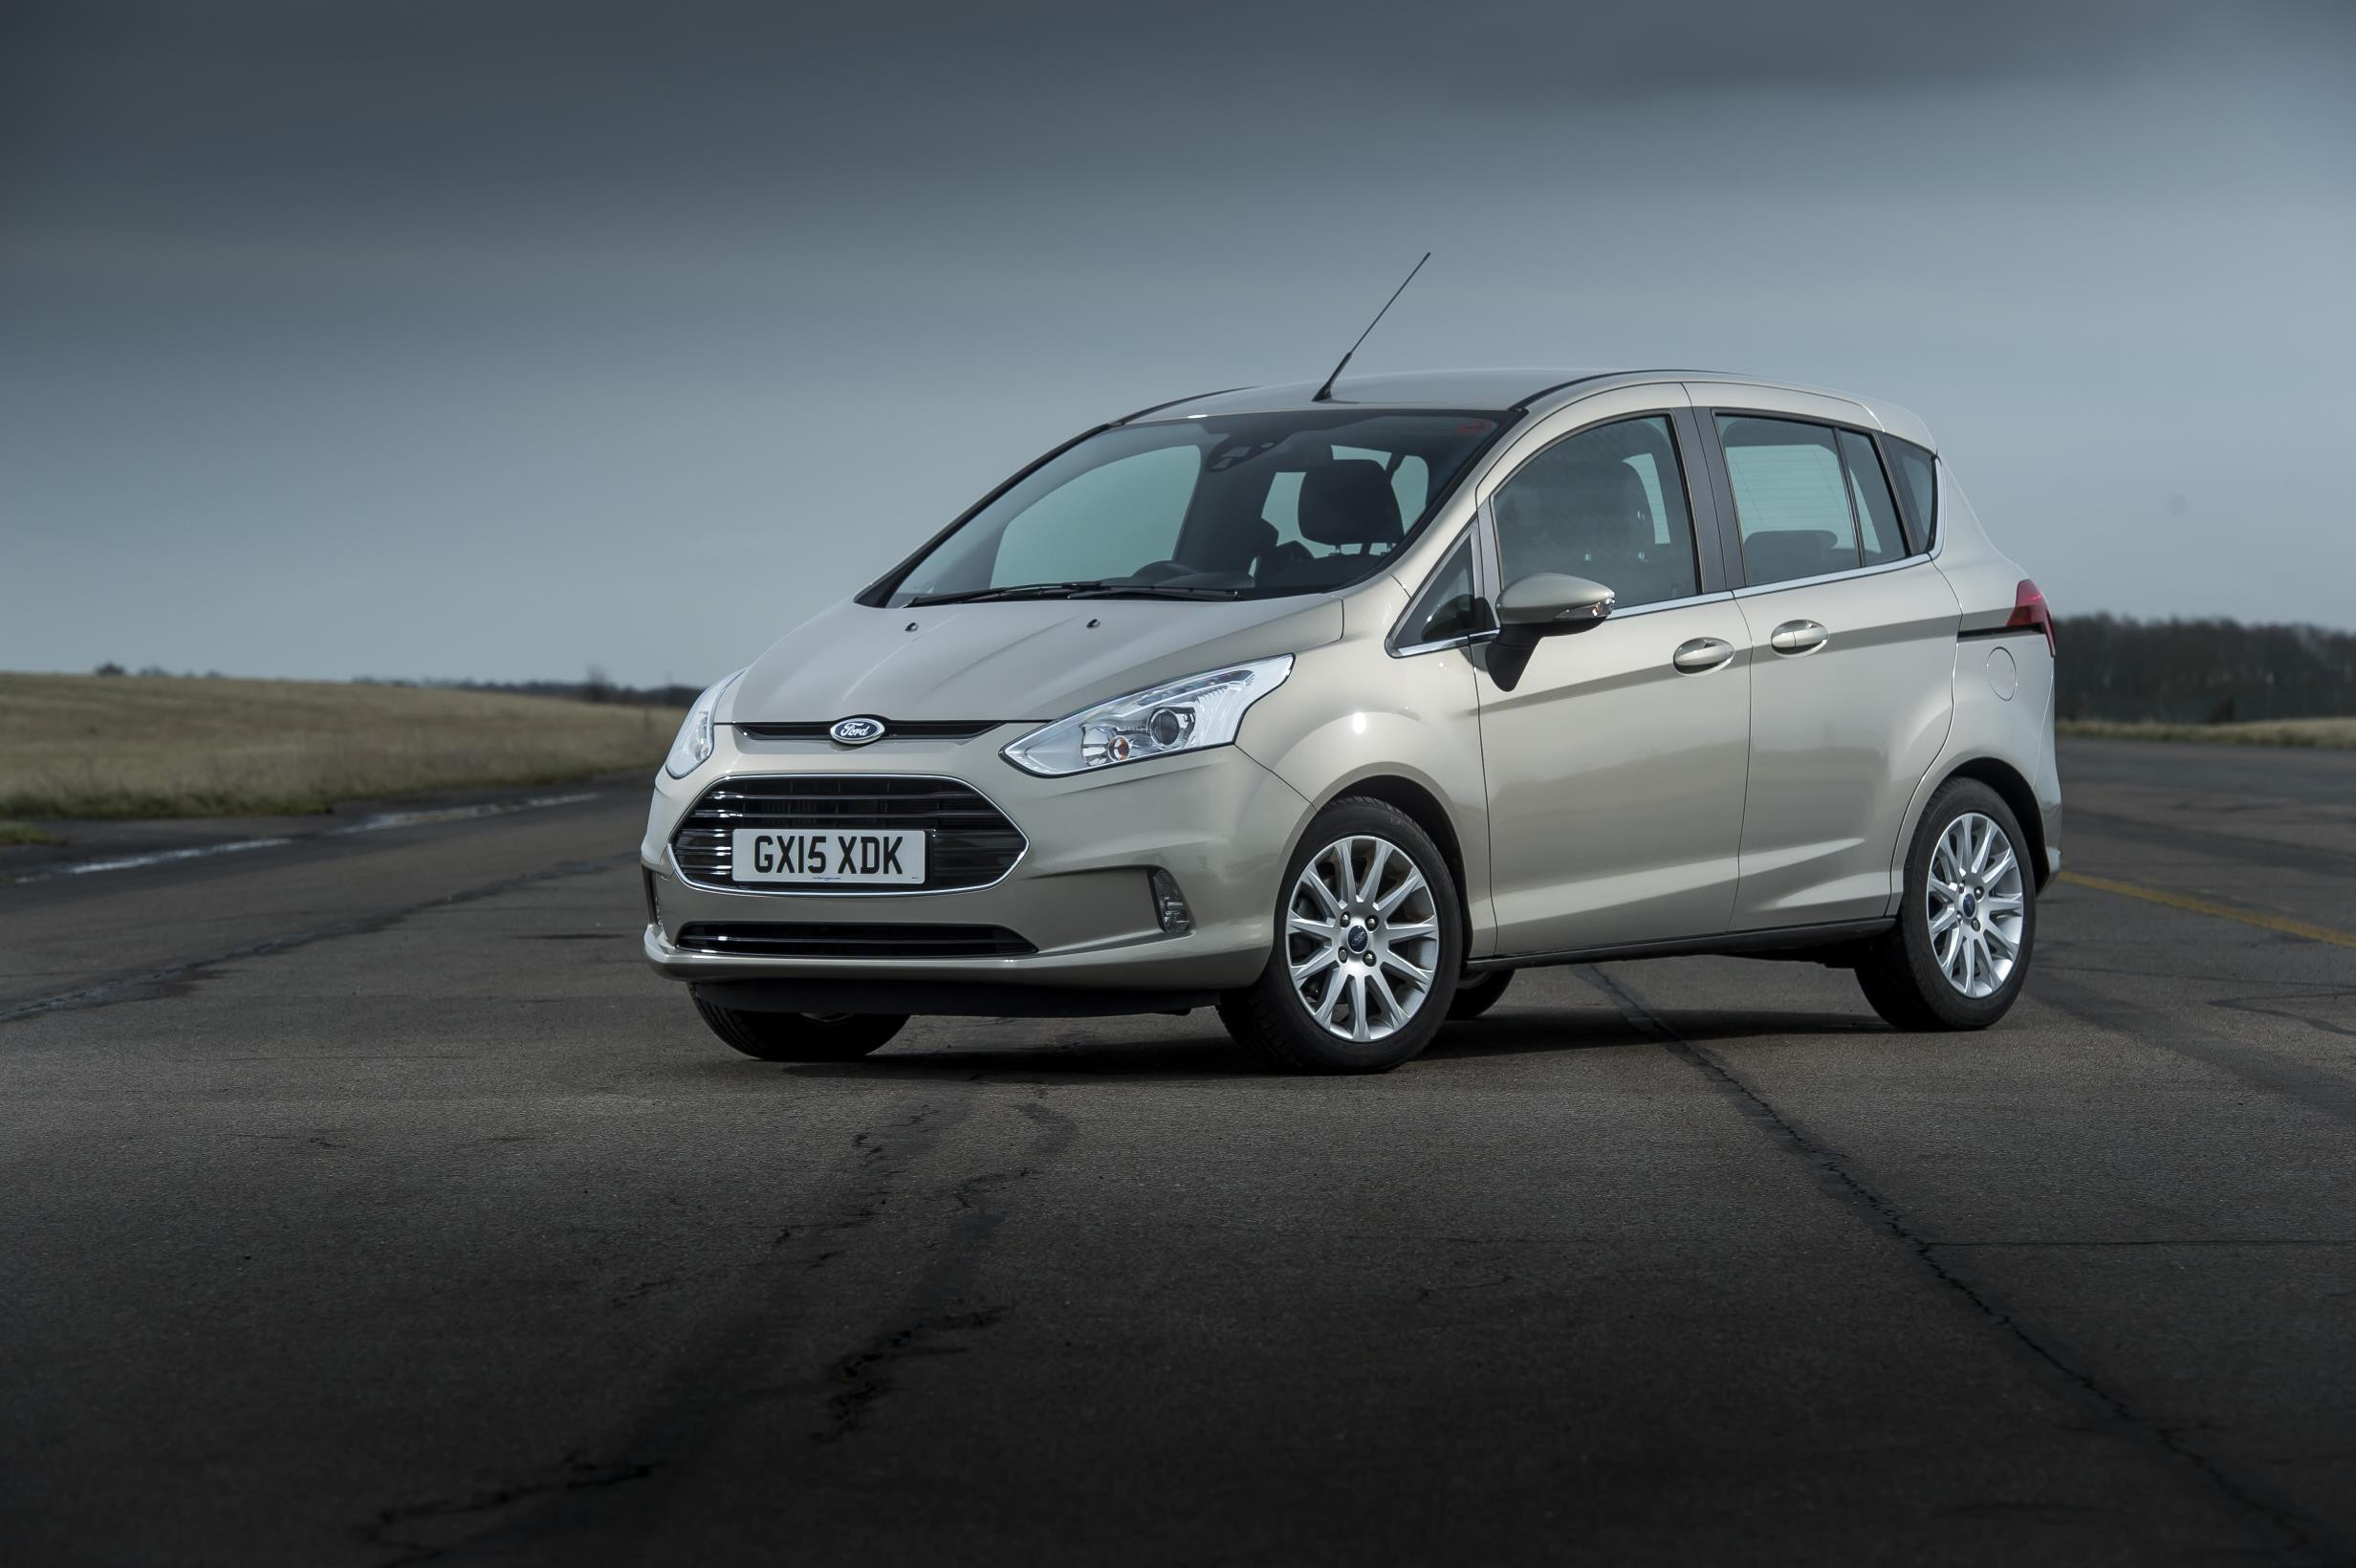 Light grey Ford B-Max parked facing three-quarters left on airport runway.